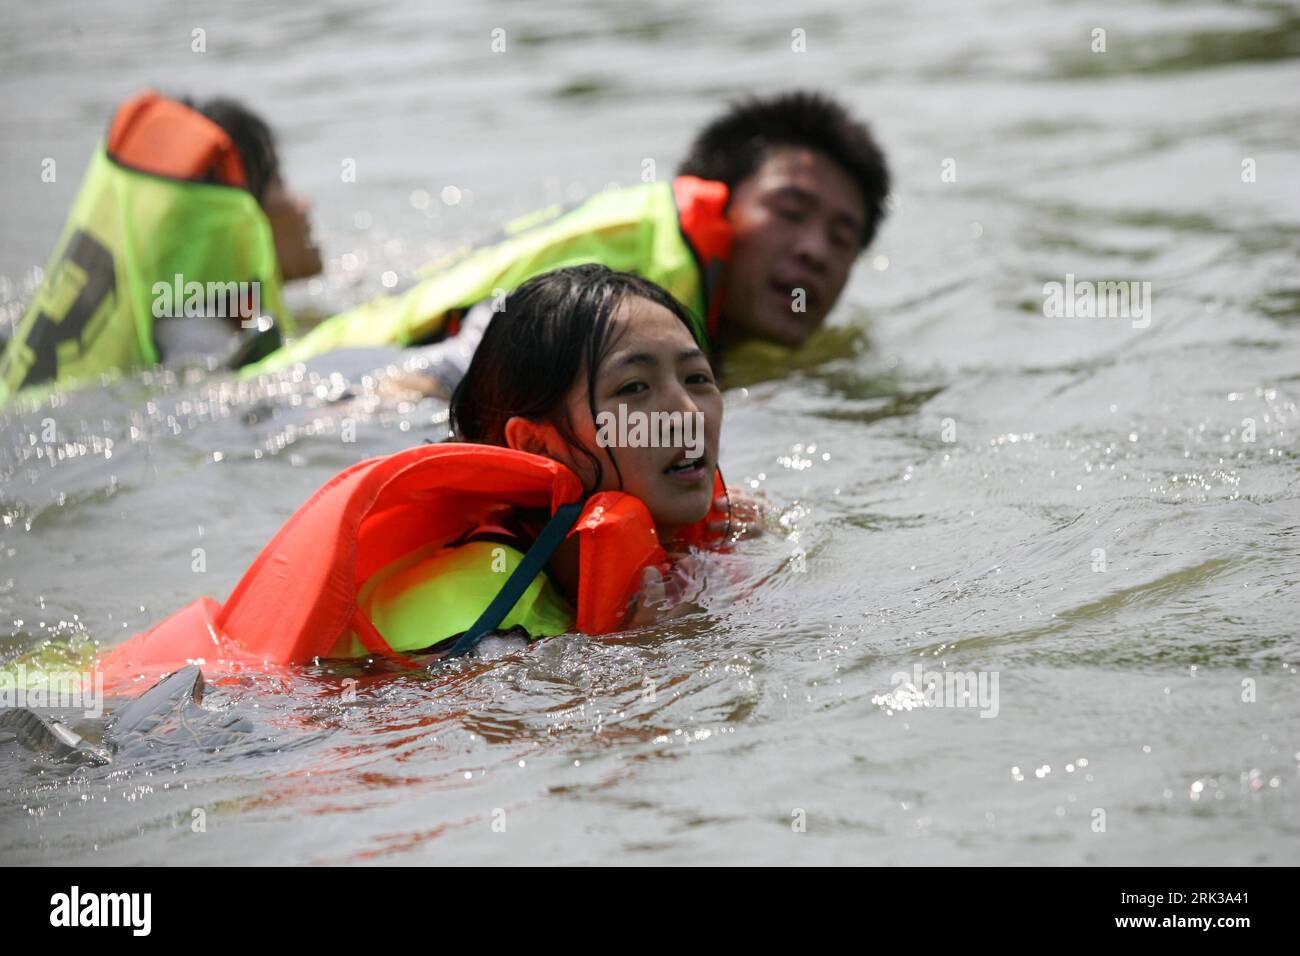 Bildnummer: 53383411  Datum: 19.09.2009  Copyright: imago/Xinhua (090919) --DEQING, Sept. 19, 2009 (Xinhua) -- Contestants compete in swimming contest in Deqing County, east China s Zhejiang Province, Sept. 19, 2009. The first China marsh cross-country challenge was held here on Saturday, attracting contestants from over 20 universities and outdoor sports clubs. (Xinhua/Xu Zhuoheng) (zgp) (6)CHINA-ZHEJIANG-DEQING-MARSH CROSS-COUNTRY CHALLENGE (CN) PUBLICATIONxNOTxINxCHN Fotostory Durchquerung Crosslauf Wettrennen kbdig xsk 2009 quer o0 Teilnehmer Fluss schwimmen    Bildnummer 53383411 Date 19 Stock Photo